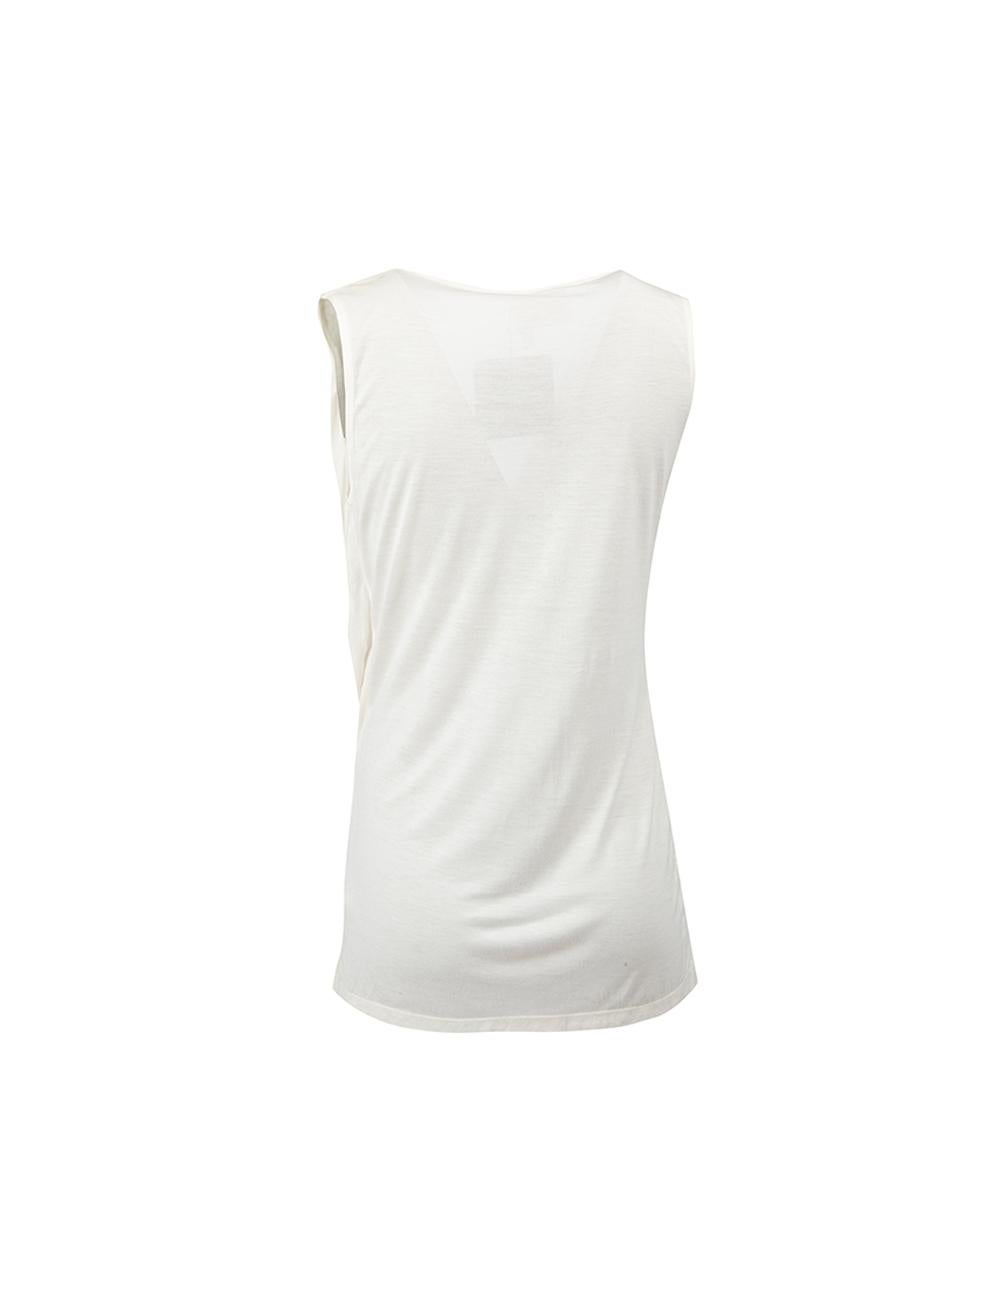 Lanvin Women's Cream Silver Taping Sleeveless Top In Good Condition For Sale In London, GB